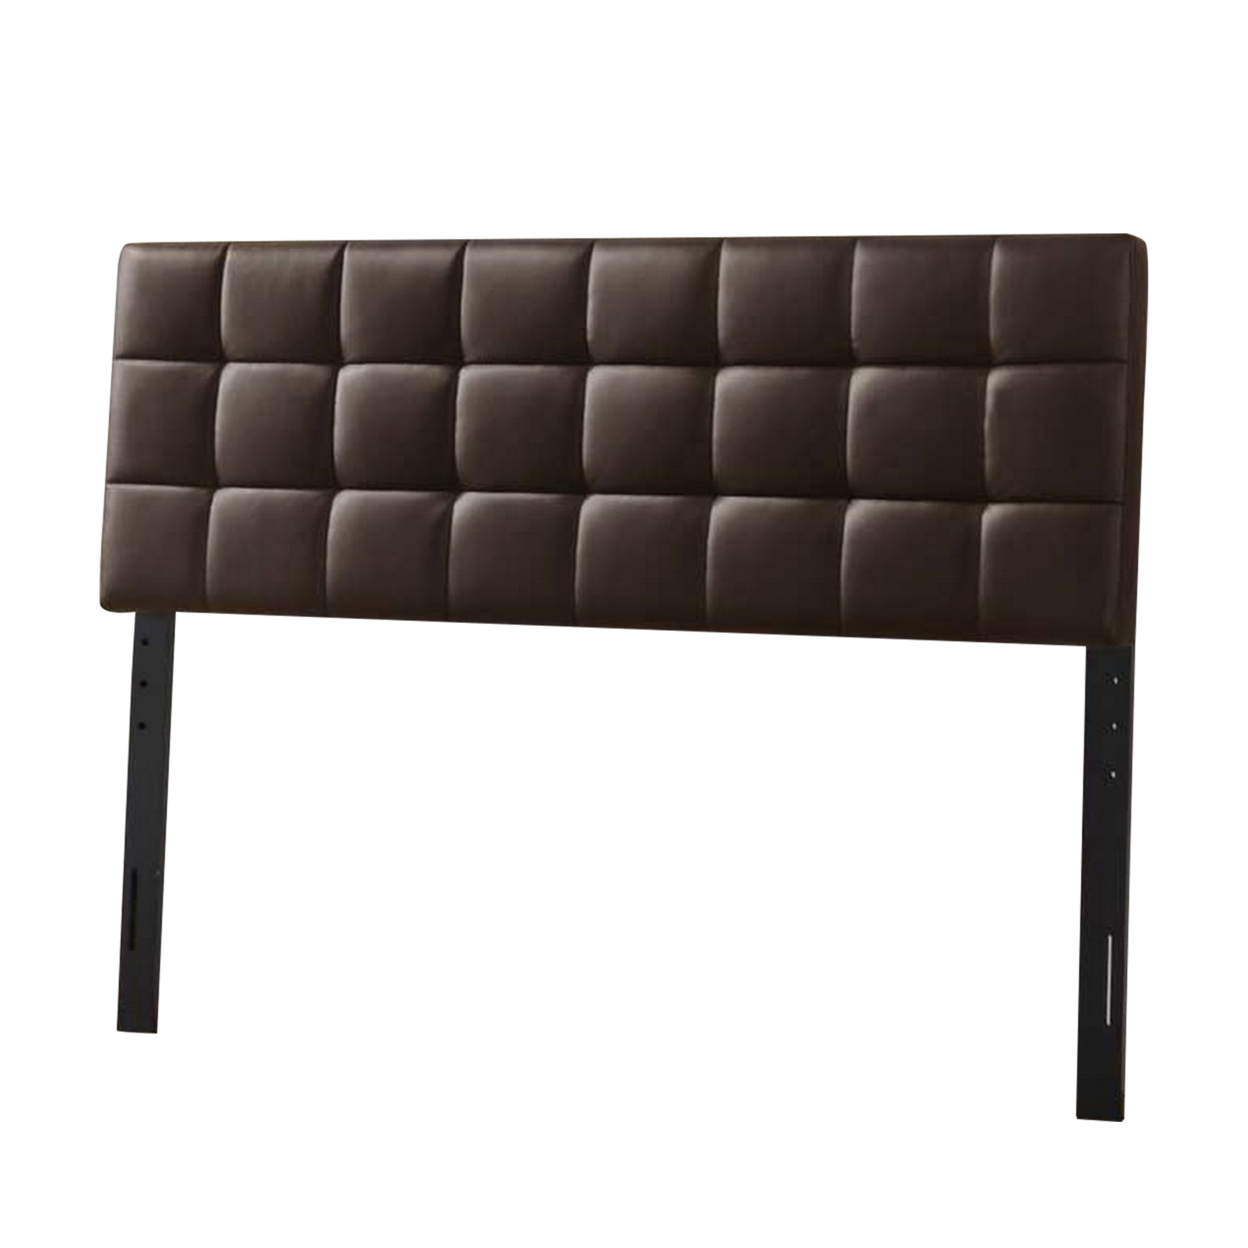 Faux Leather Upholstered King Size Headboard With Square Tufting, Brown- Saltoro Sherpi